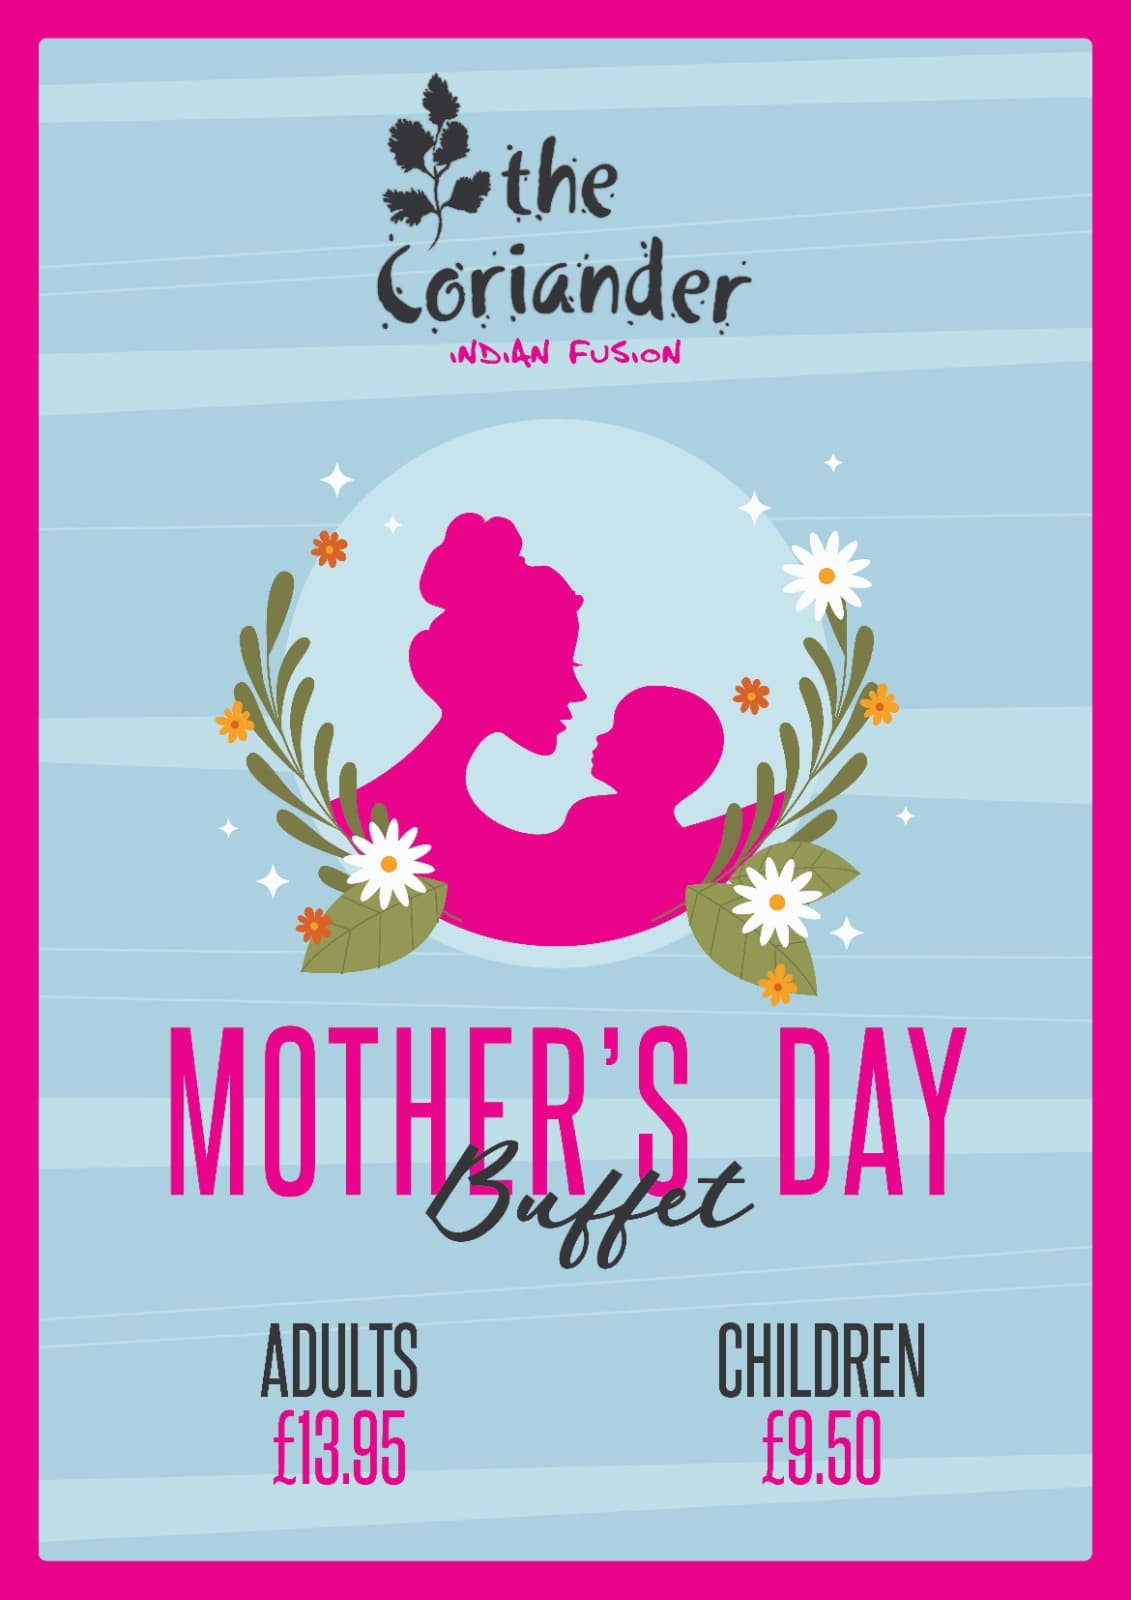 The Coriander Mothers Day Buffet